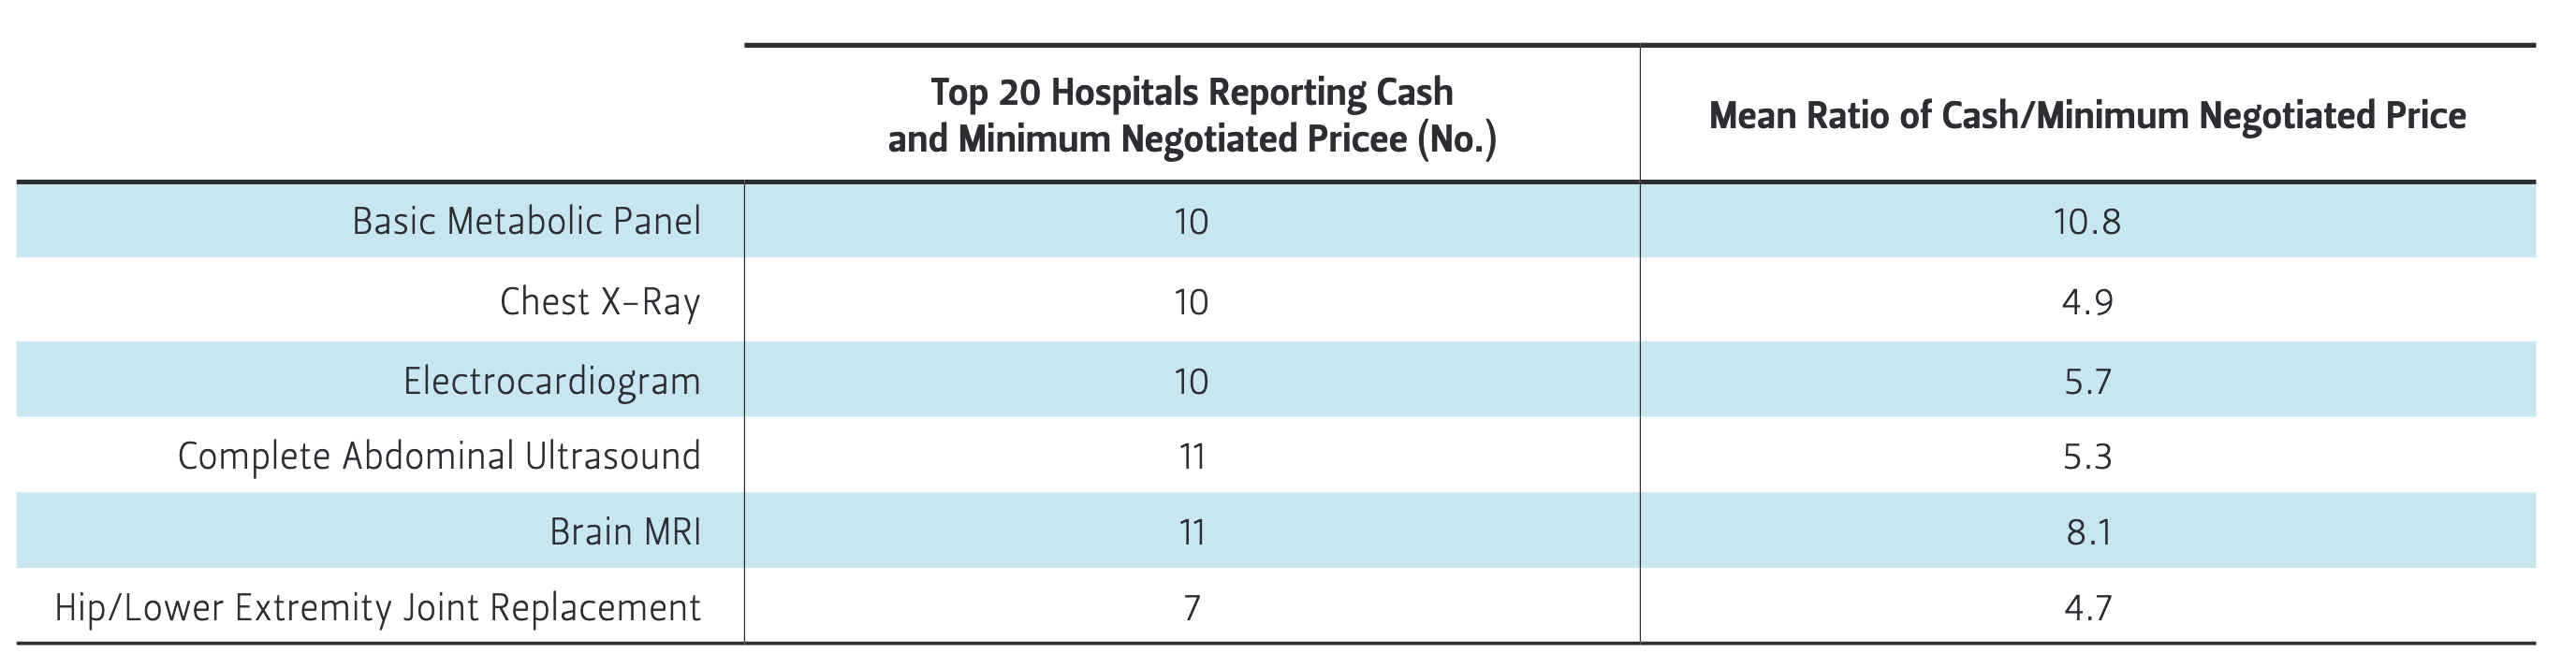 Table 2 — Comparison of Cash and Minimum Negotiated Price within Top 20 Hospitals by Service